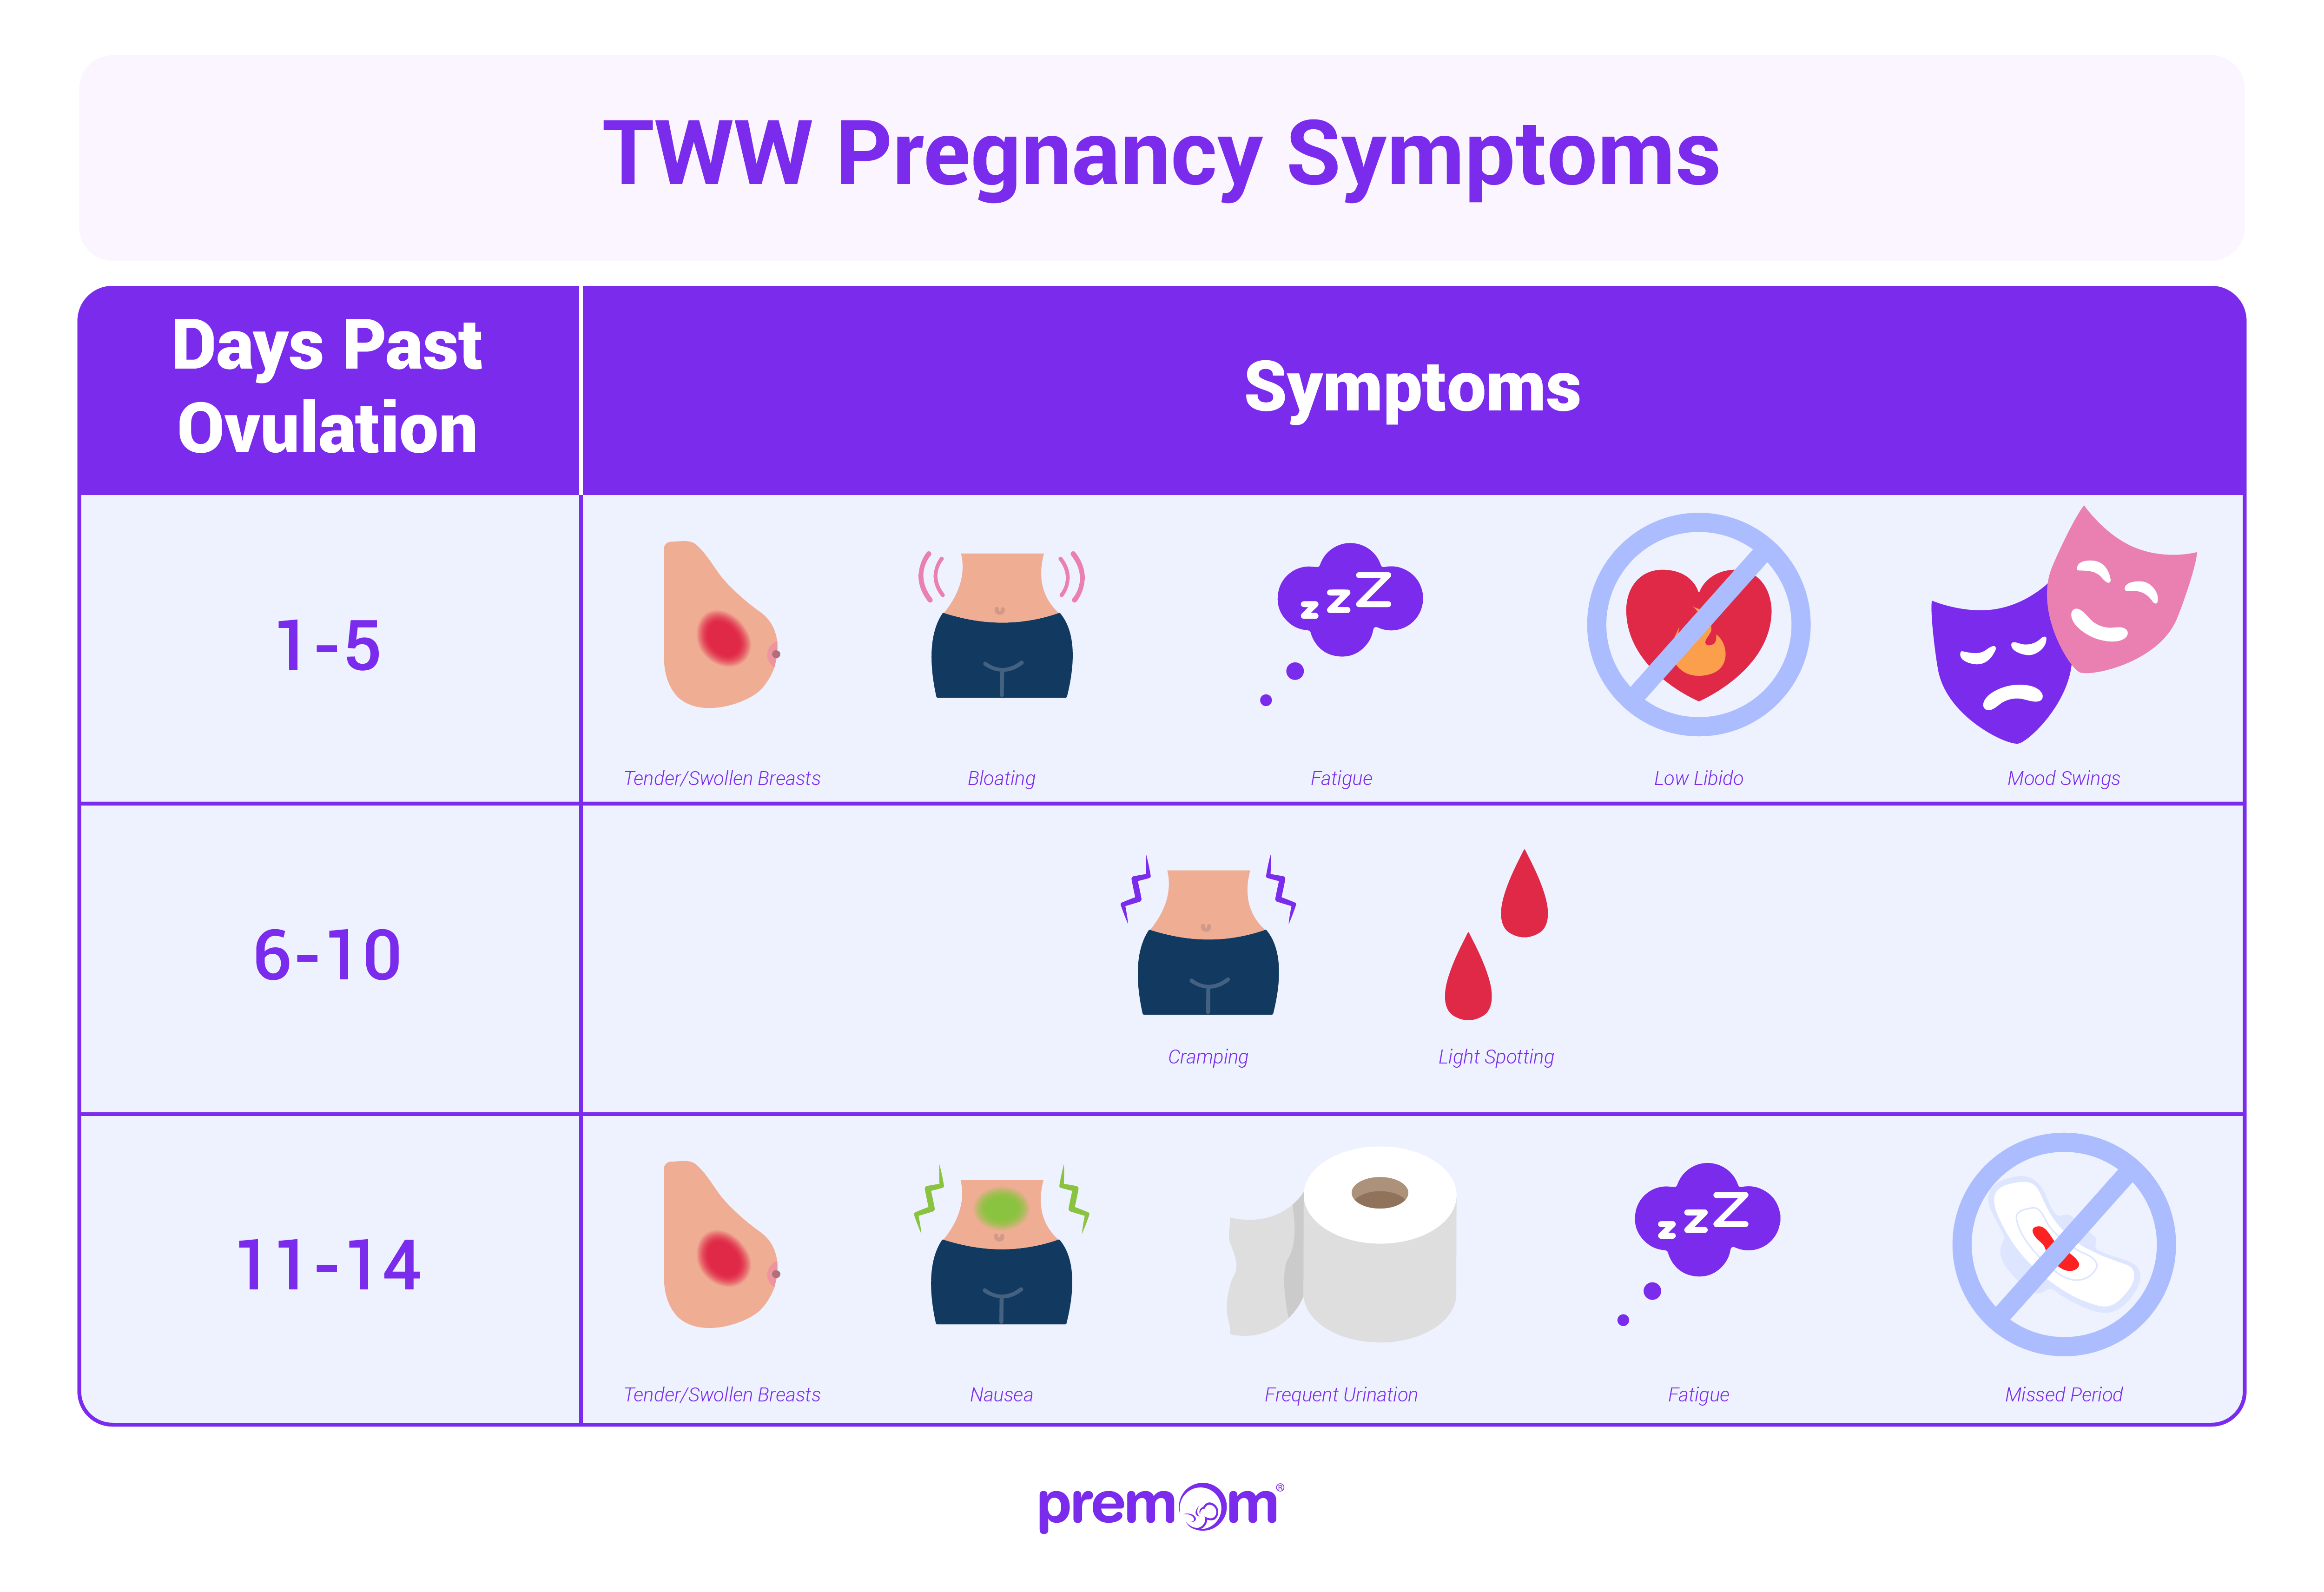 13 DPO Symptoms - Pregnancy Signs To Watch Out For